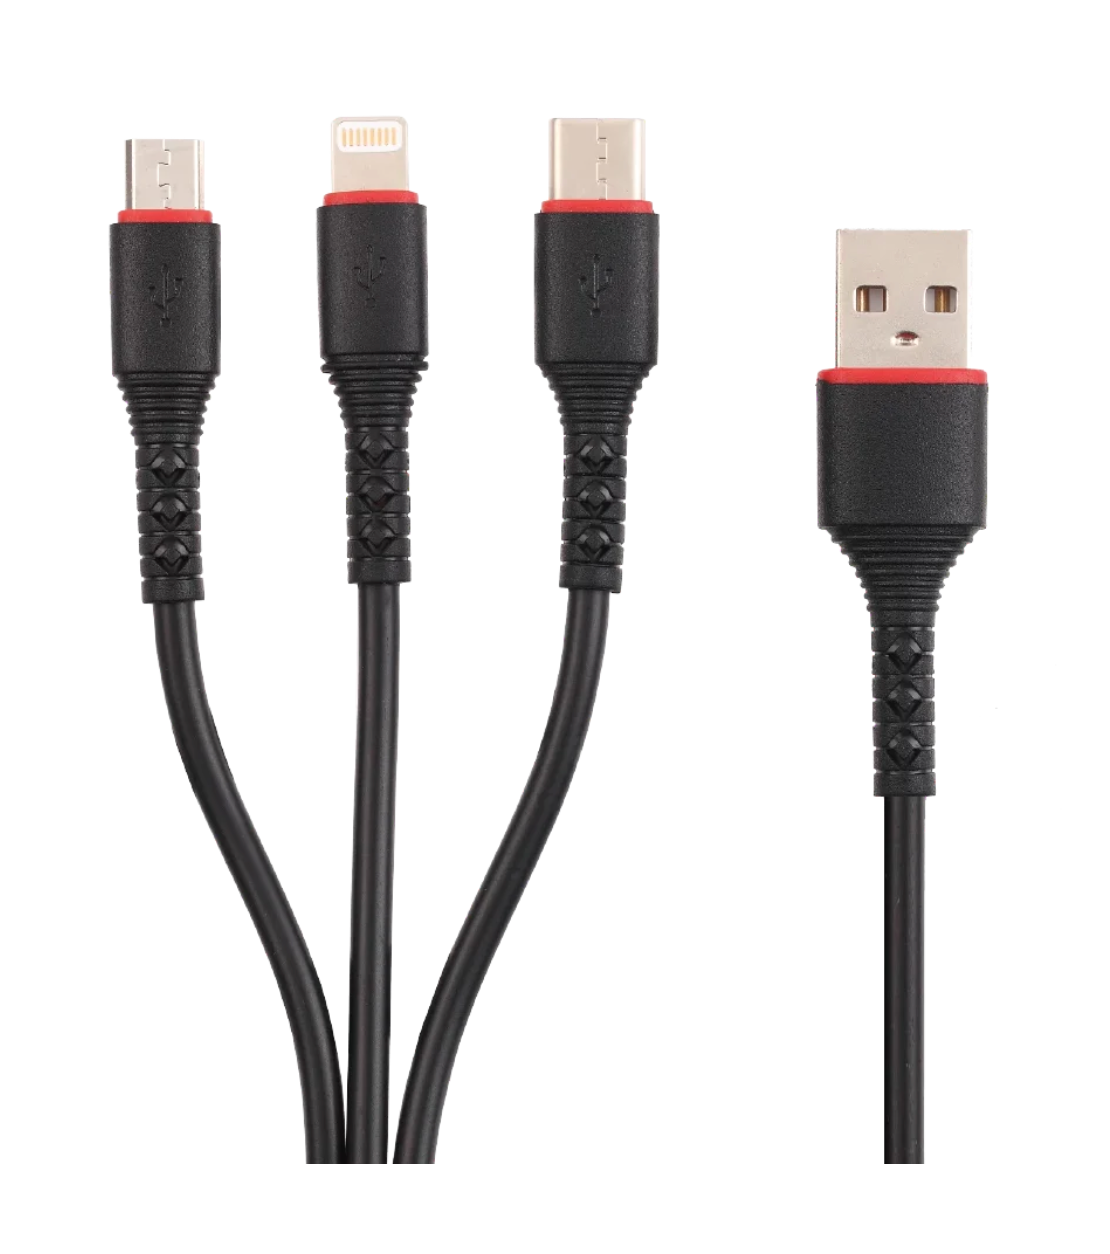 Monarch Trio 3in1 USB Fast Charging Cable | 1.1 Metres